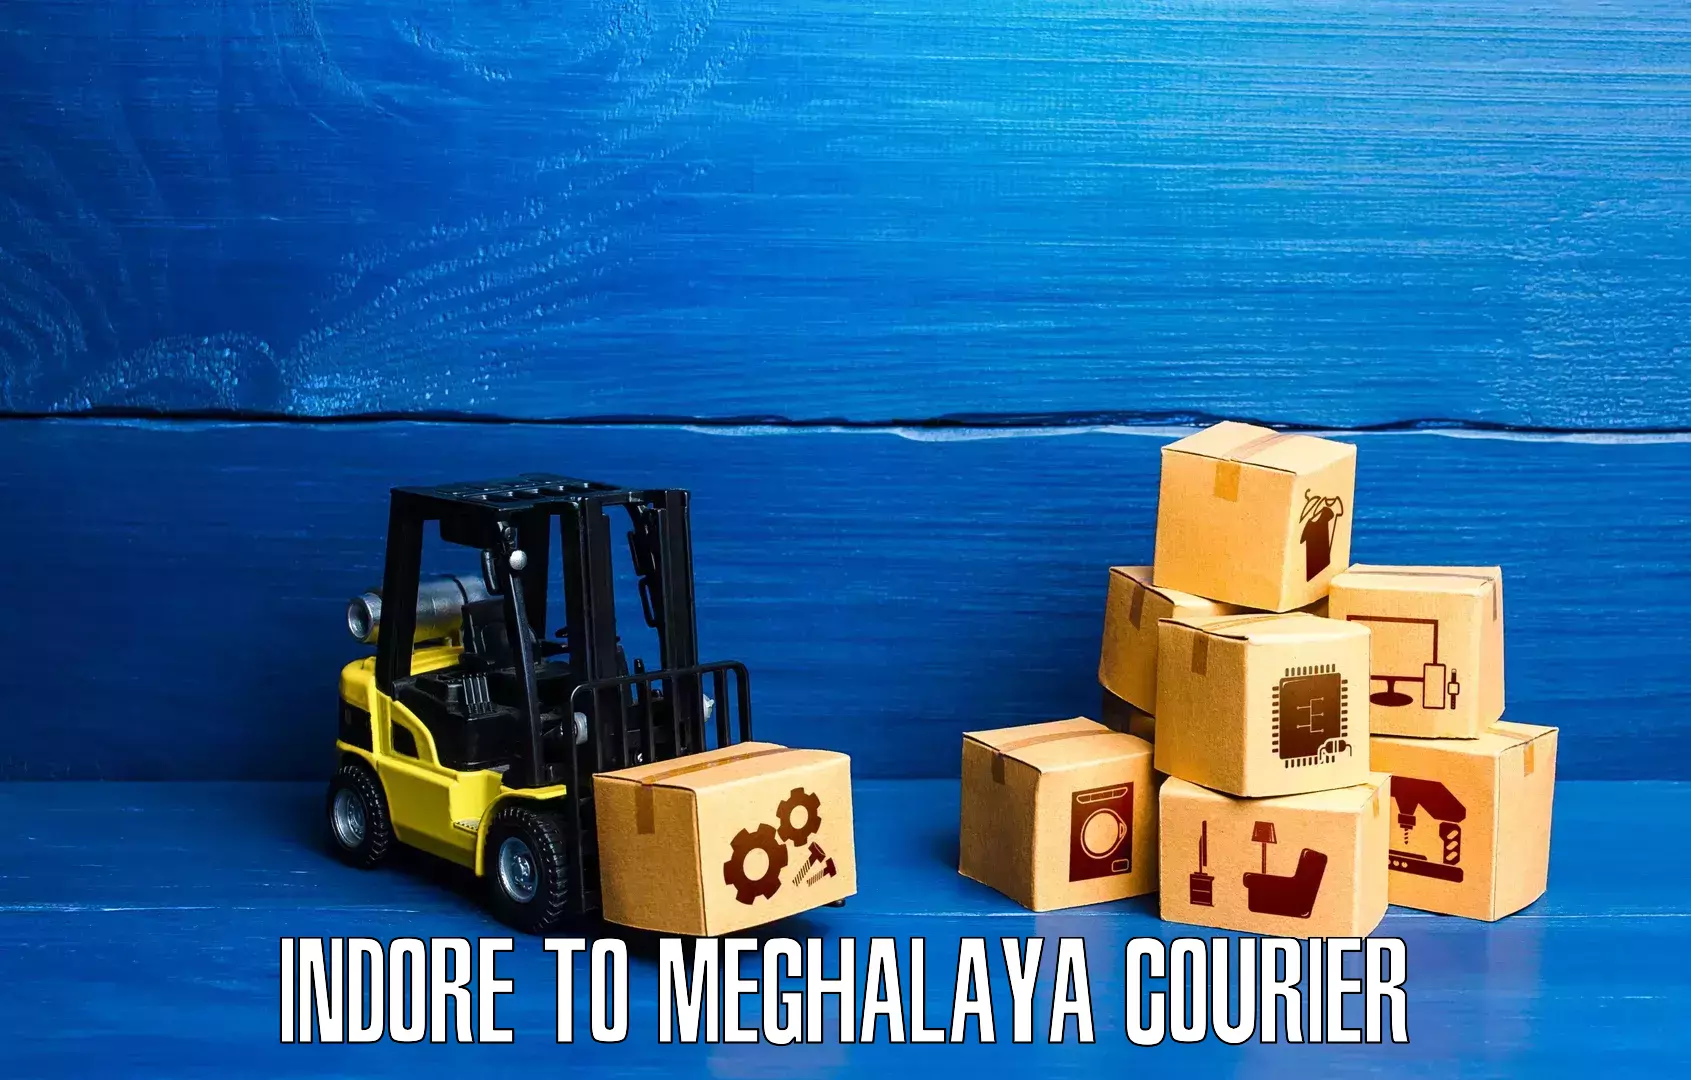 Courier service comparison Indore to Meghalaya